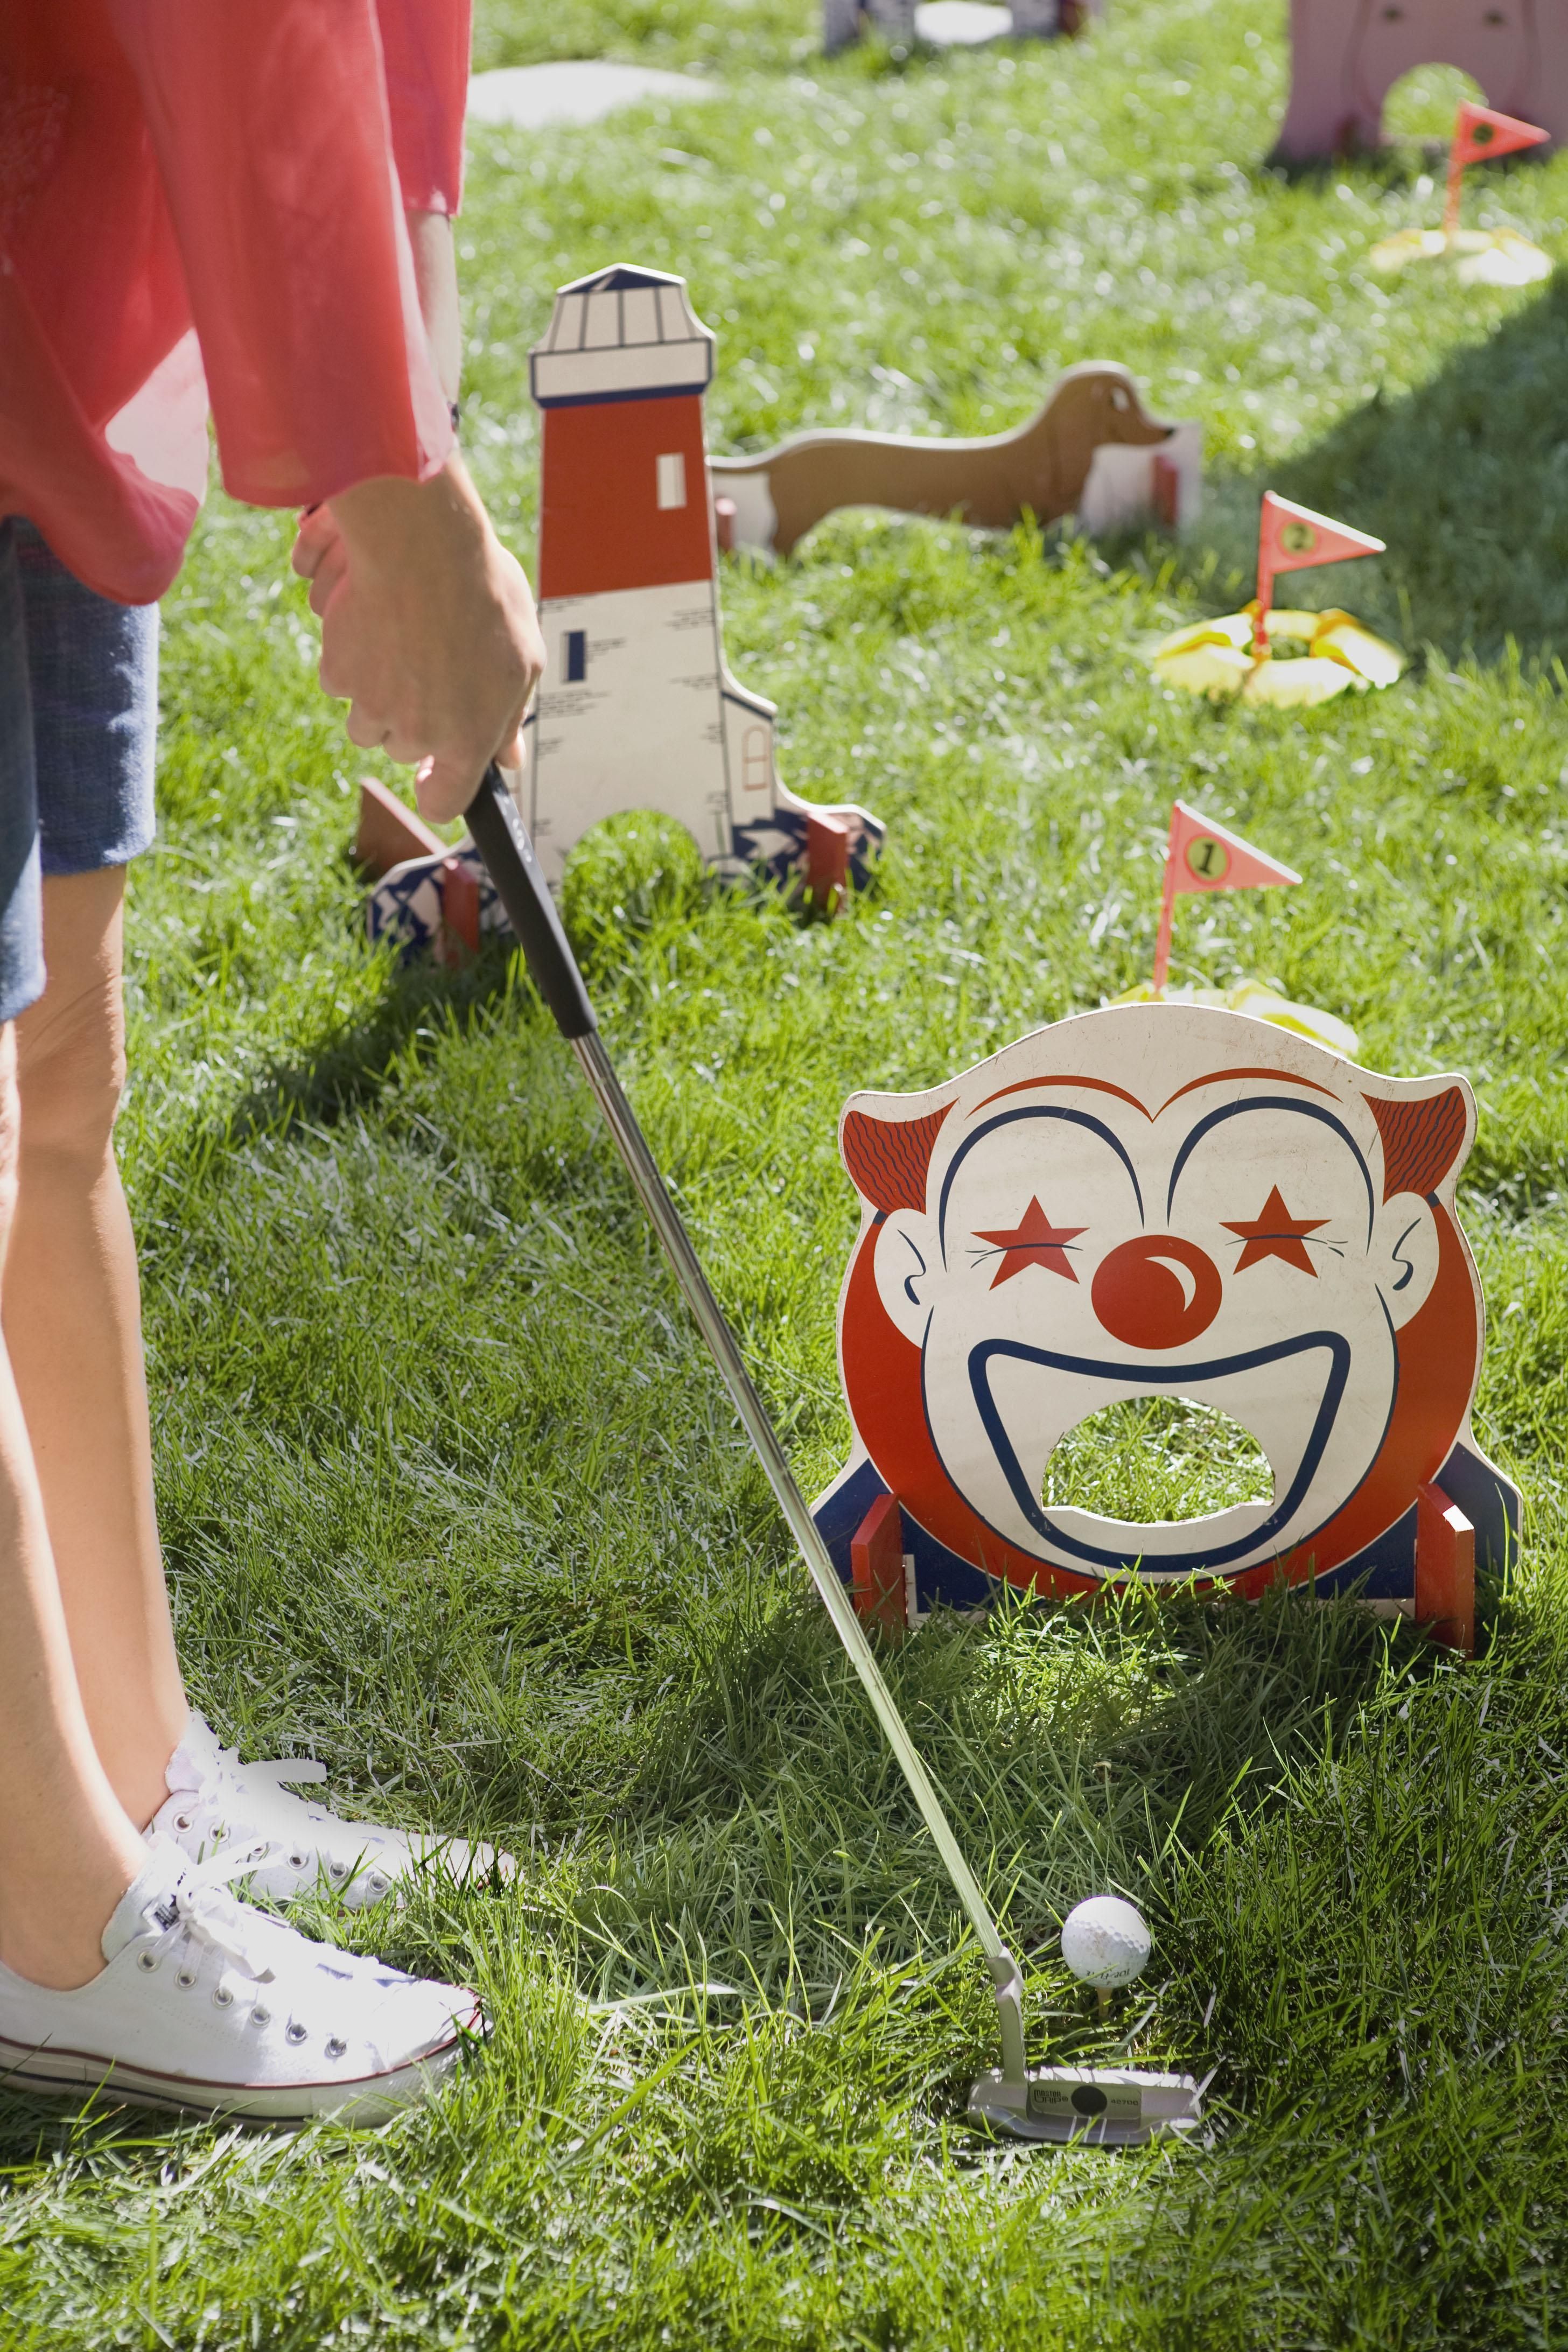 7 Fun Outdoor Games Without Materials